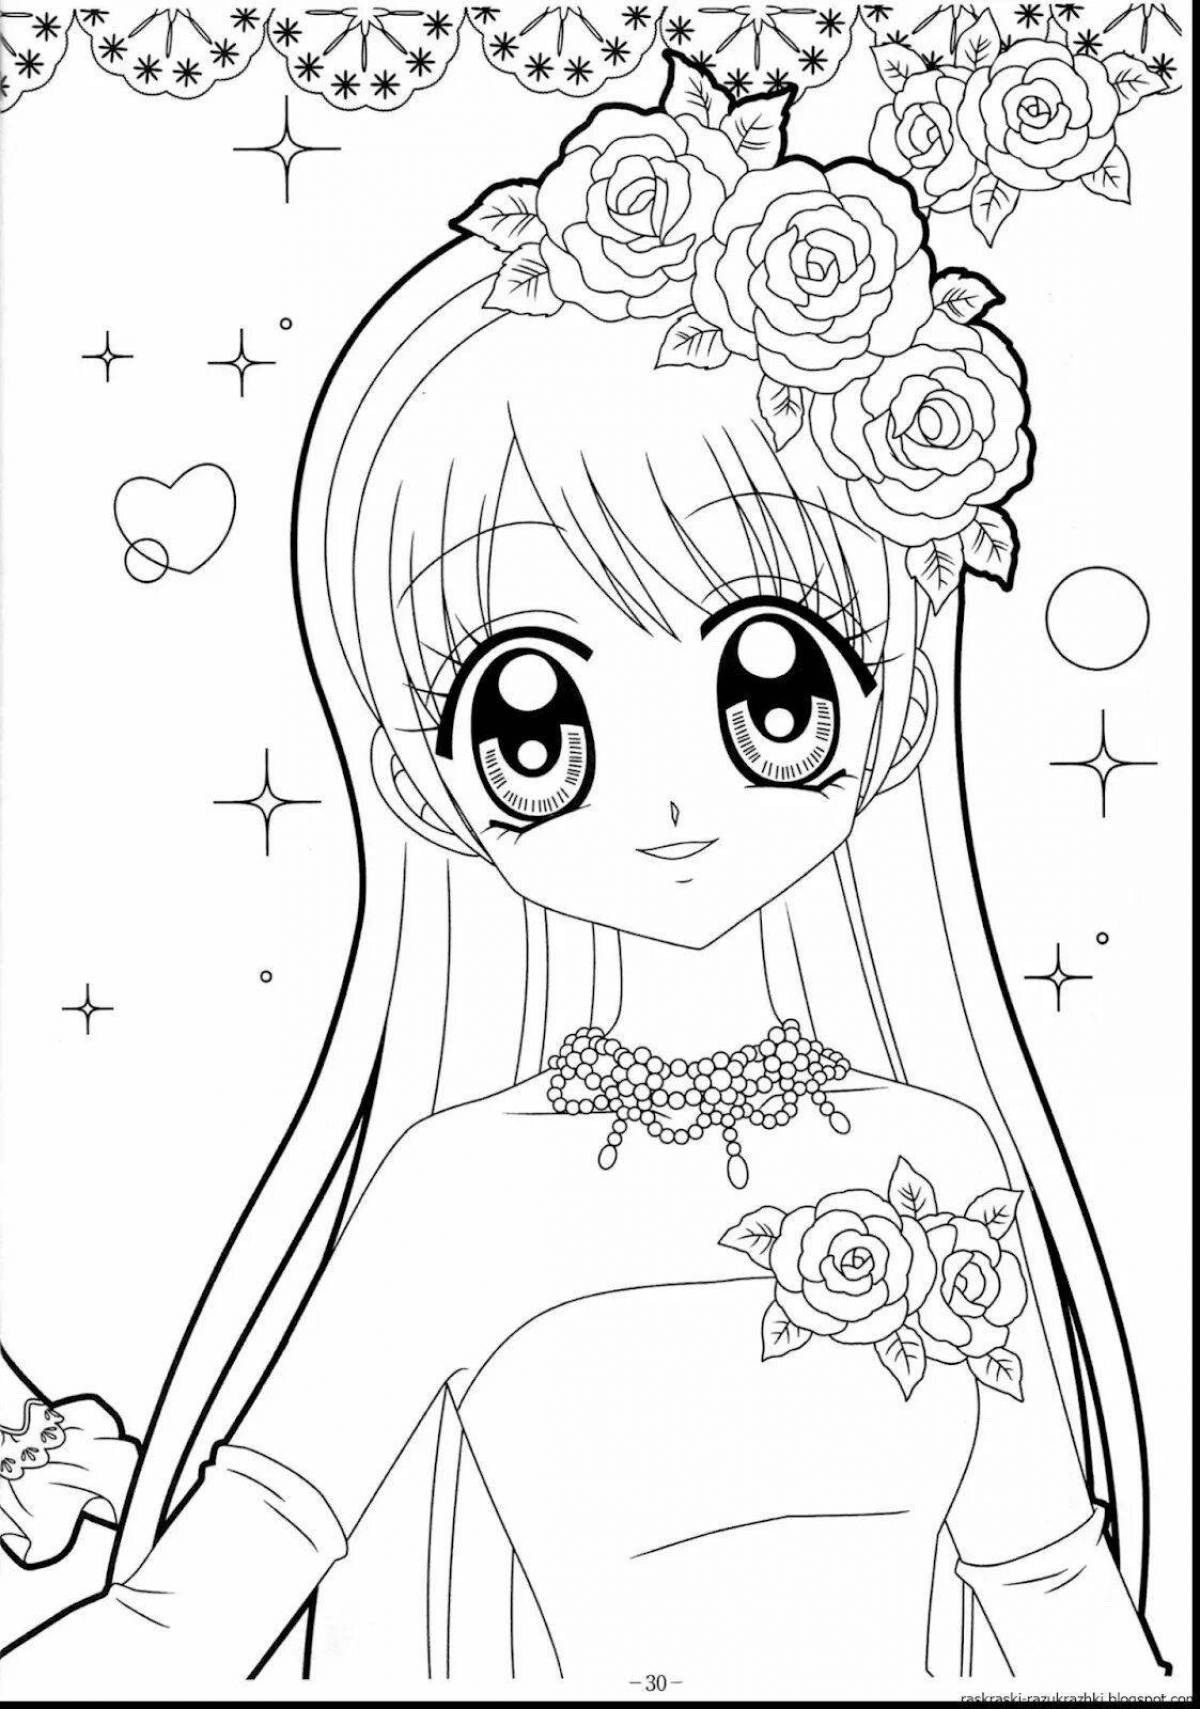 Amazing coloring book for girls 10 years old anime cute